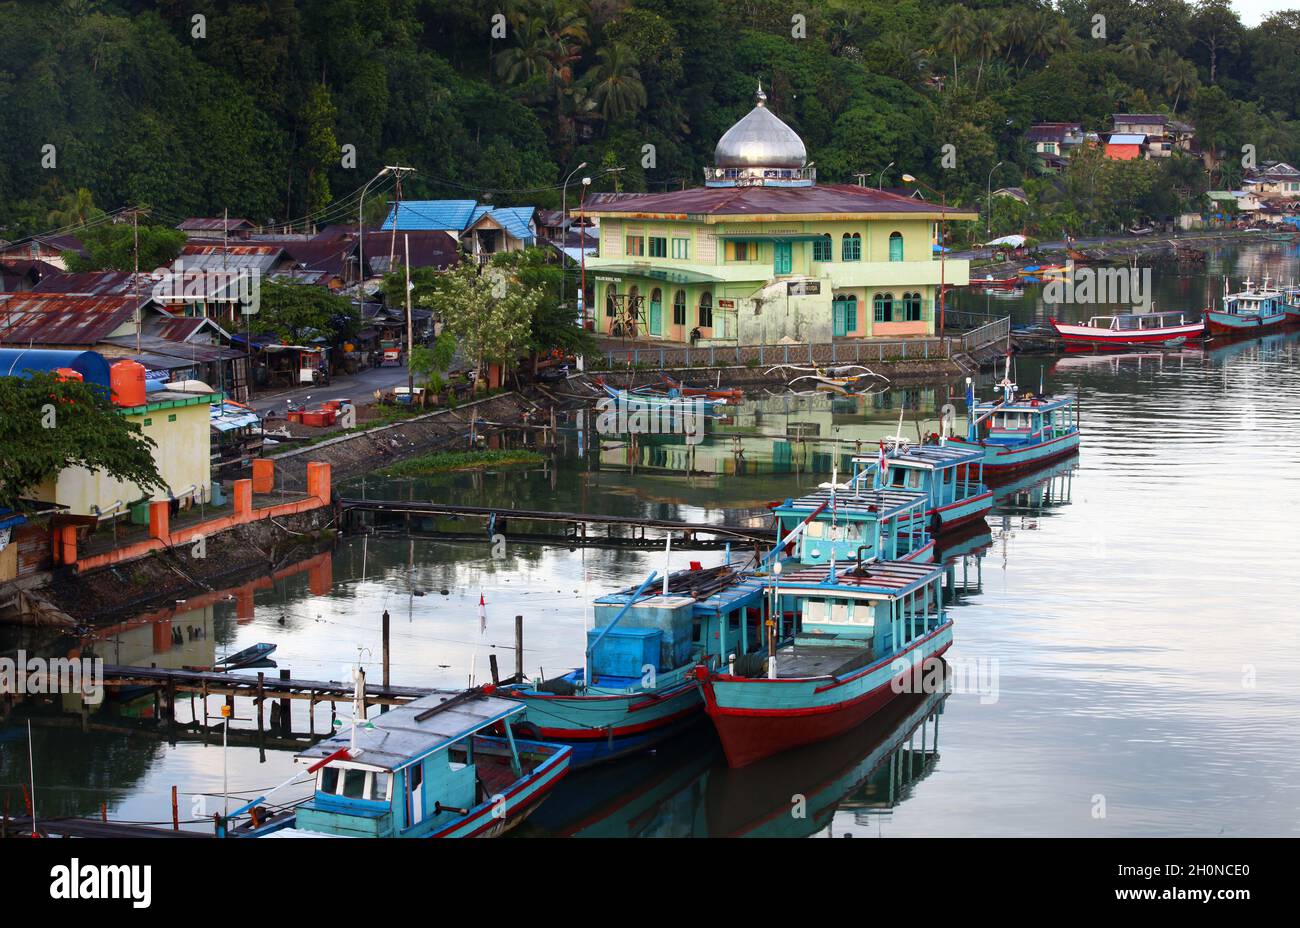 Muaro is a small old port on the Batang Arau river used by many small wooden fishing boats in the old town part of Padang, West Sumatra, Indonesia. Stock Photo